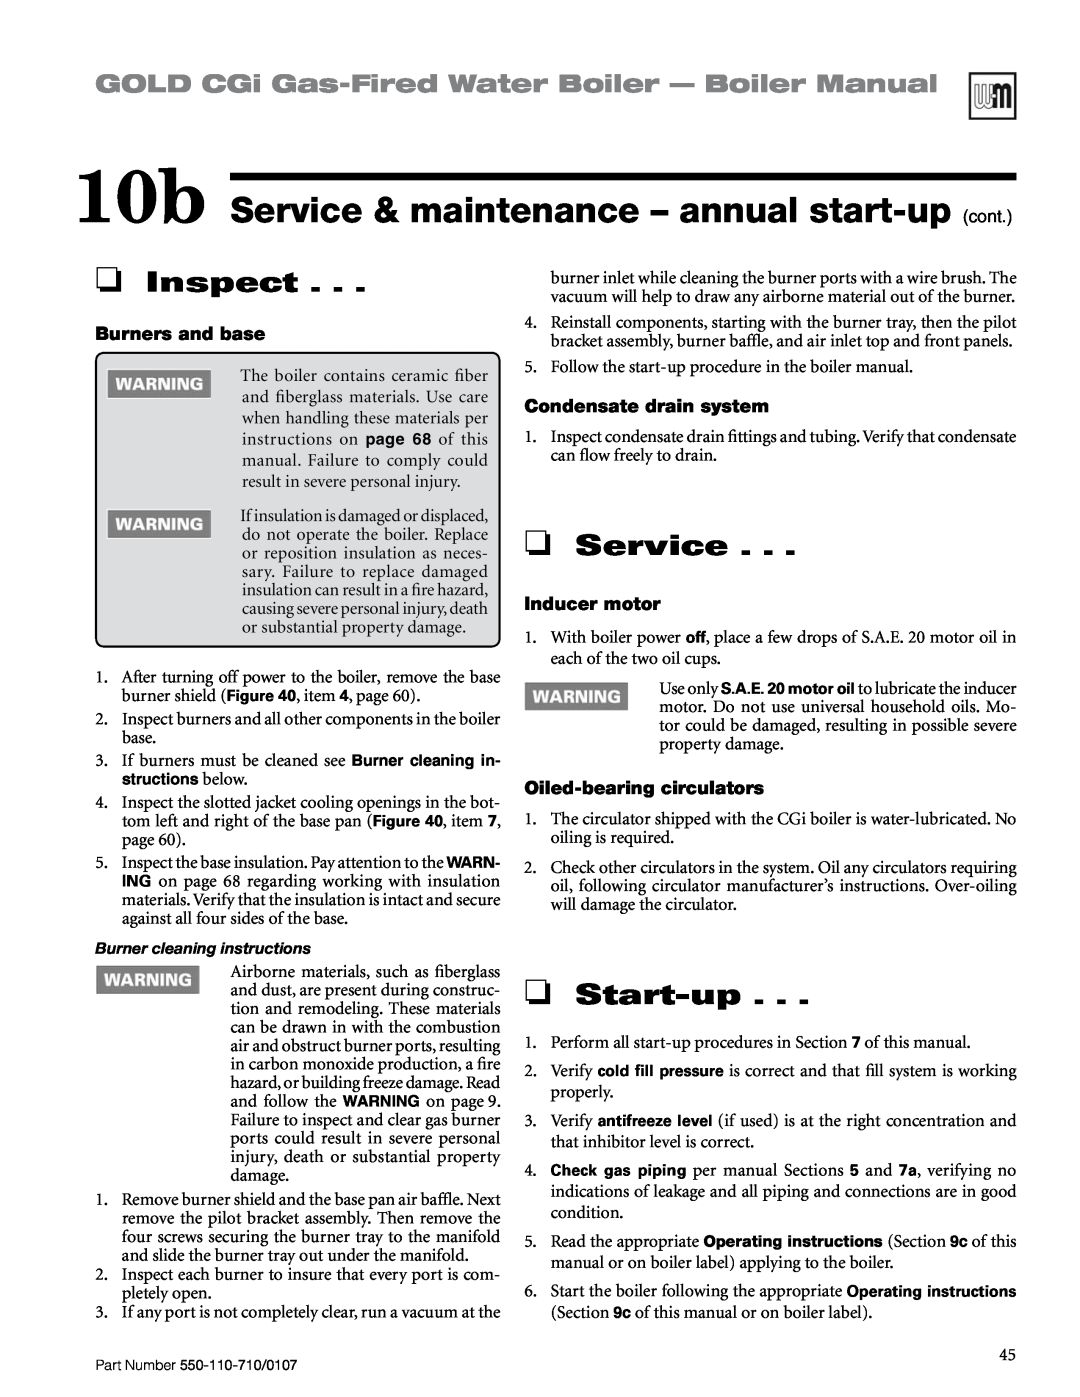 Weil-McLain 550-110-710/0107 manual 10b Service & maintenance – annual start-up cont, Start-up, Inspect, Burners and base 